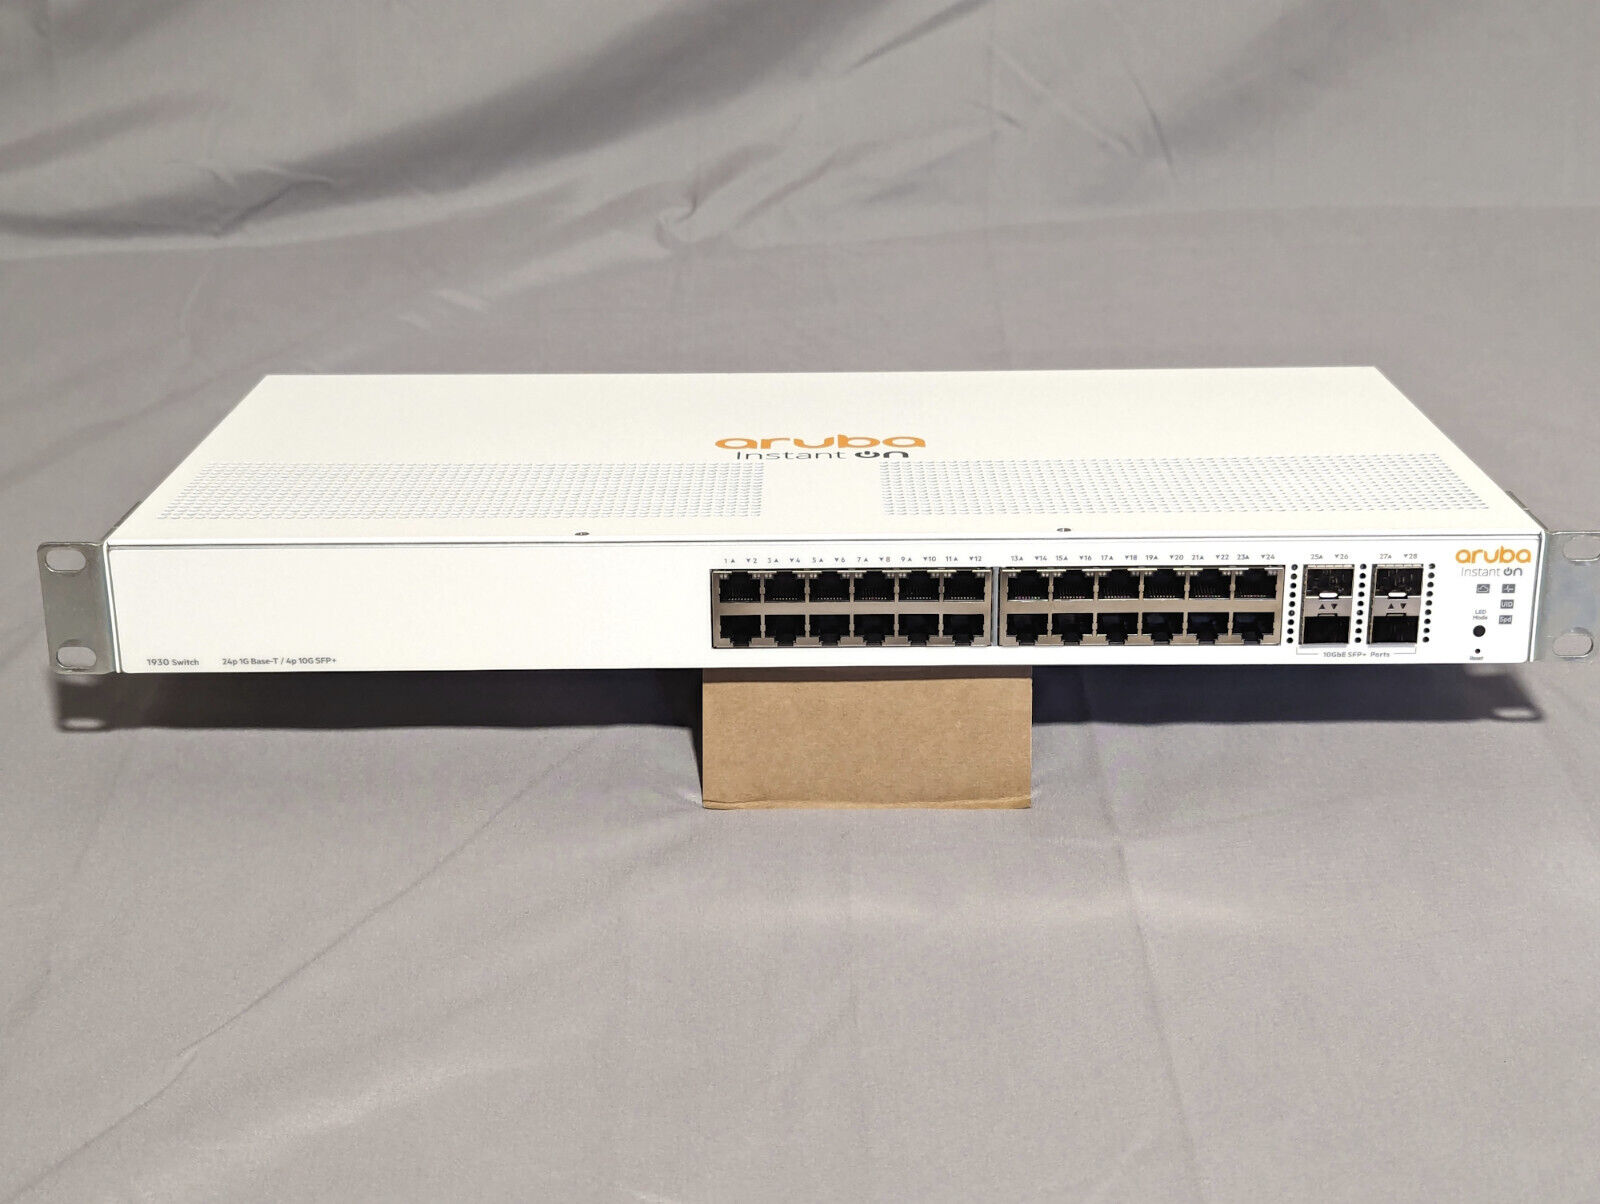 Aruba Instant On 1930 24-Port GbE 4xSFP/SFP+ 10G Managed Ethernet Switch JL682A